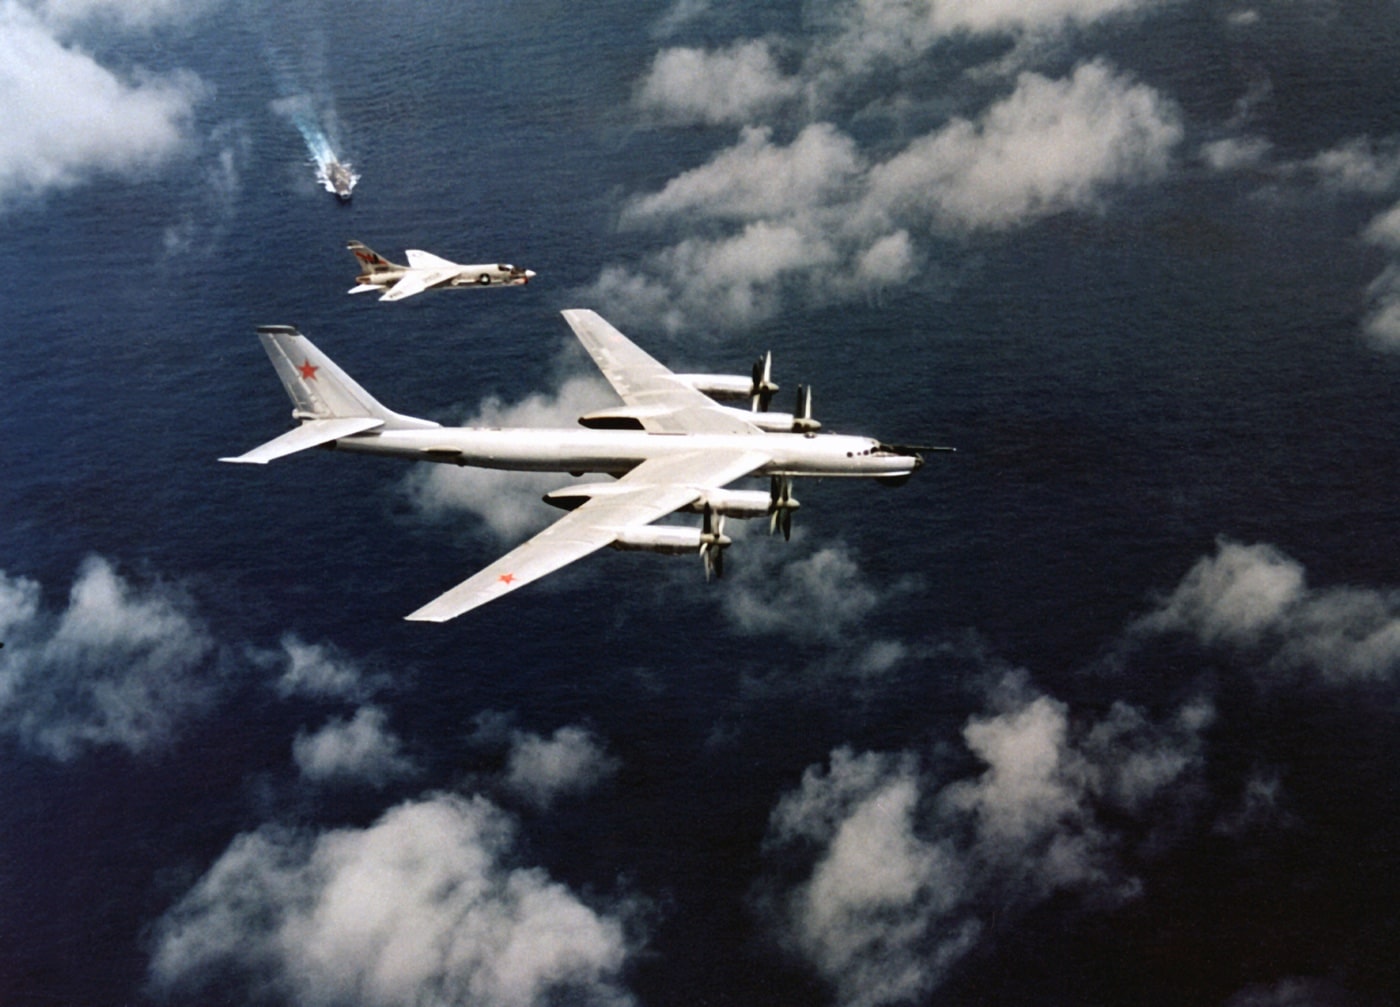 In this photo, an F8U Crusader escorts a Soviet Union TU-95 Bear bomber away from a U.S. Navy carrier group during the Cold War. The Crusader design was a carrier based fighter that was more than a match for the Russian MiG-17s and somilar communist aircraft of the era. It was equipped with guns and missiles for air-to-air combat. In an era of jets, the Chance Vought fighter was designed with guns. 